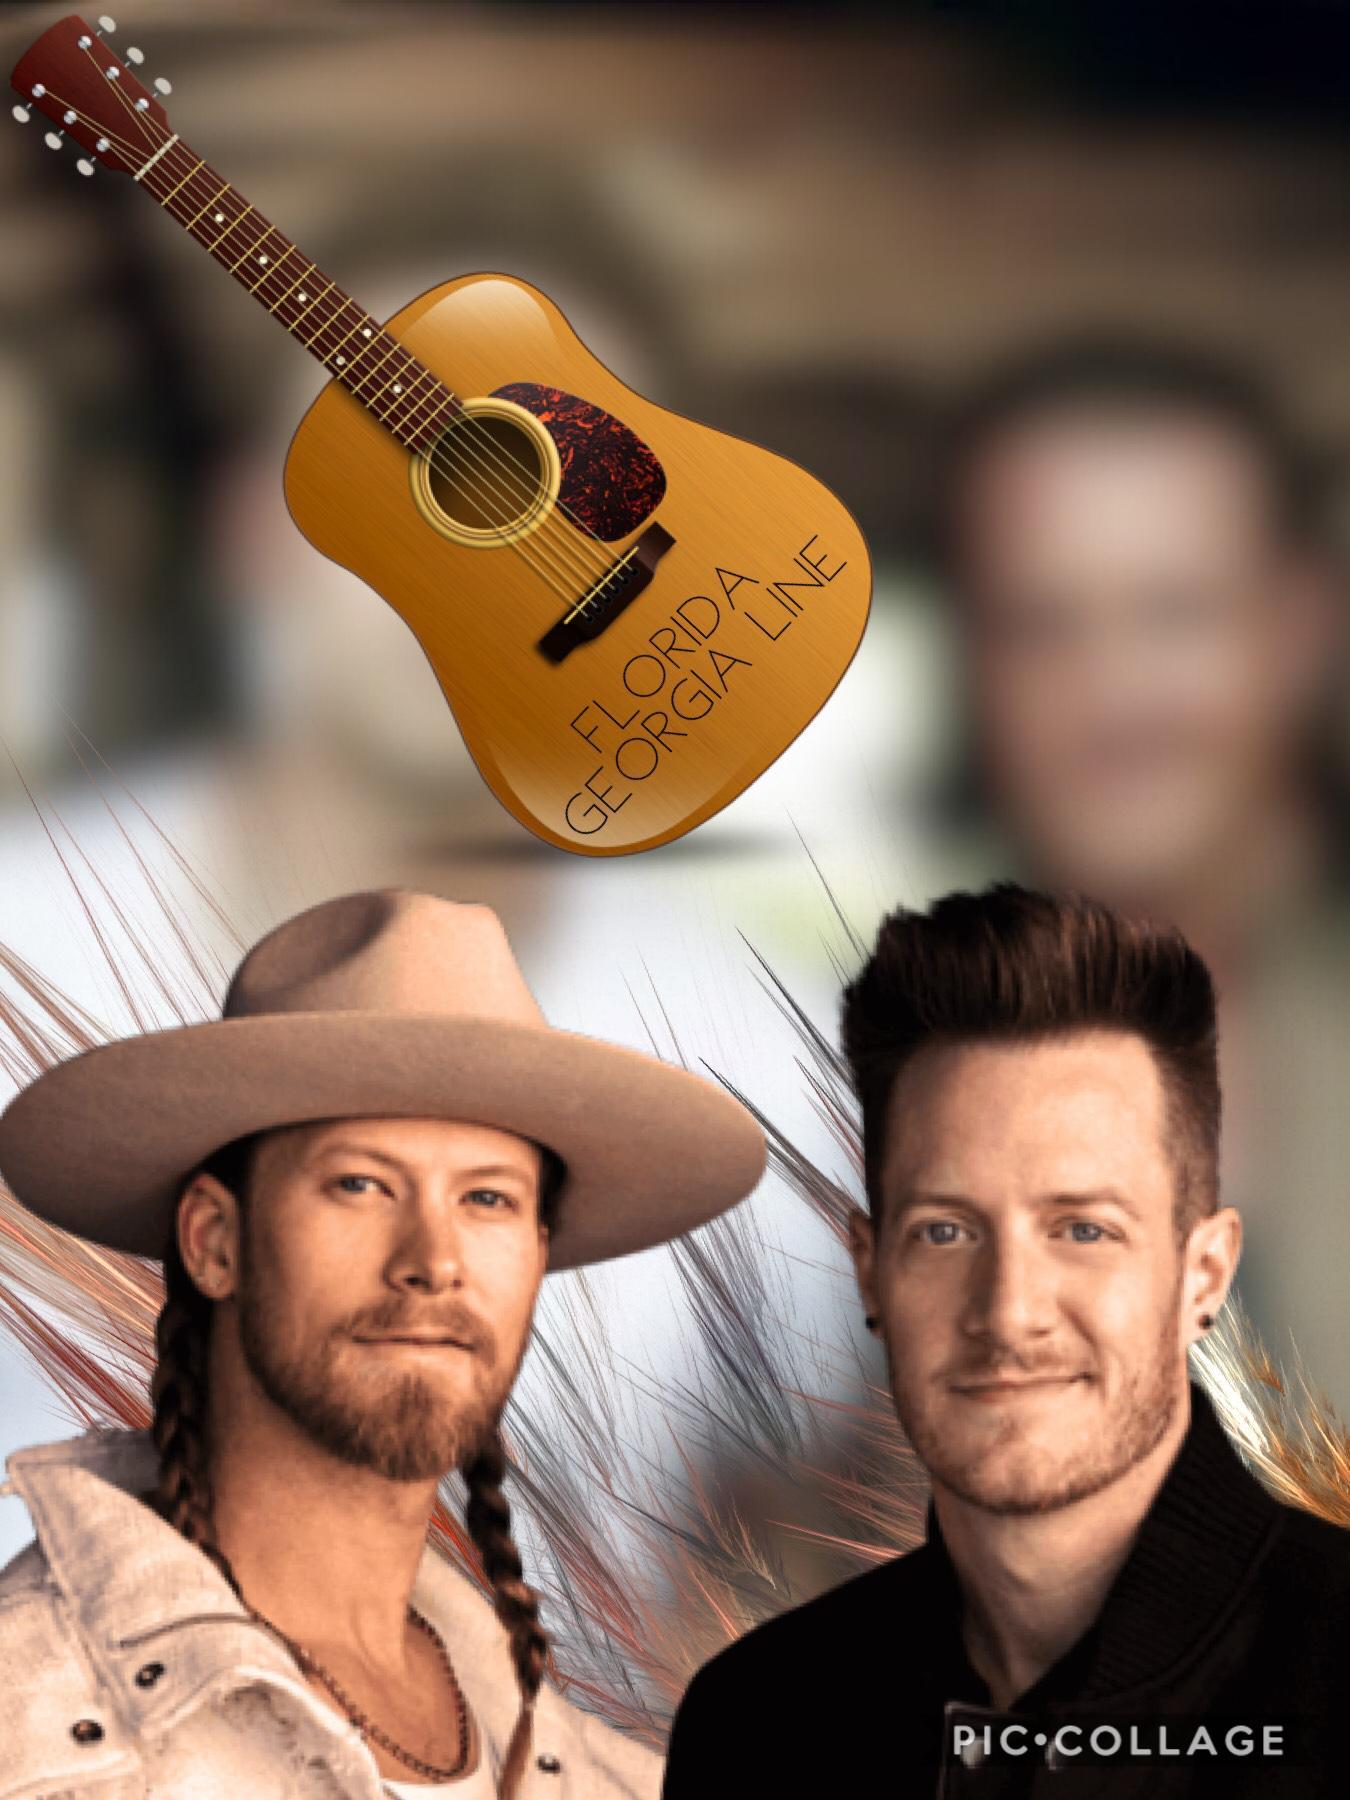 Collage by FGL4ever